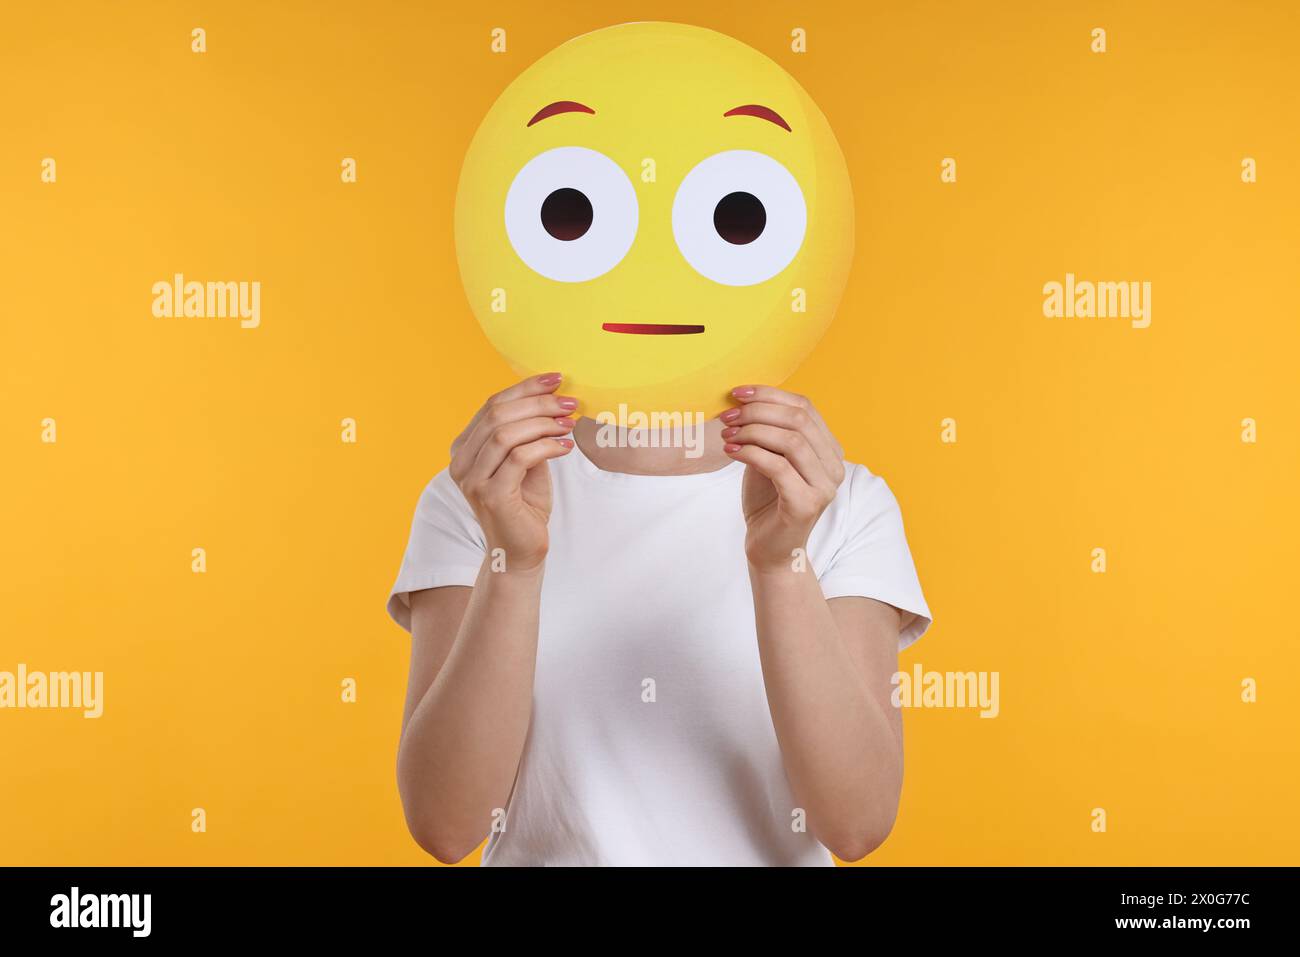 Woman covering face with surprised emoticon on yellow background Stock Photo